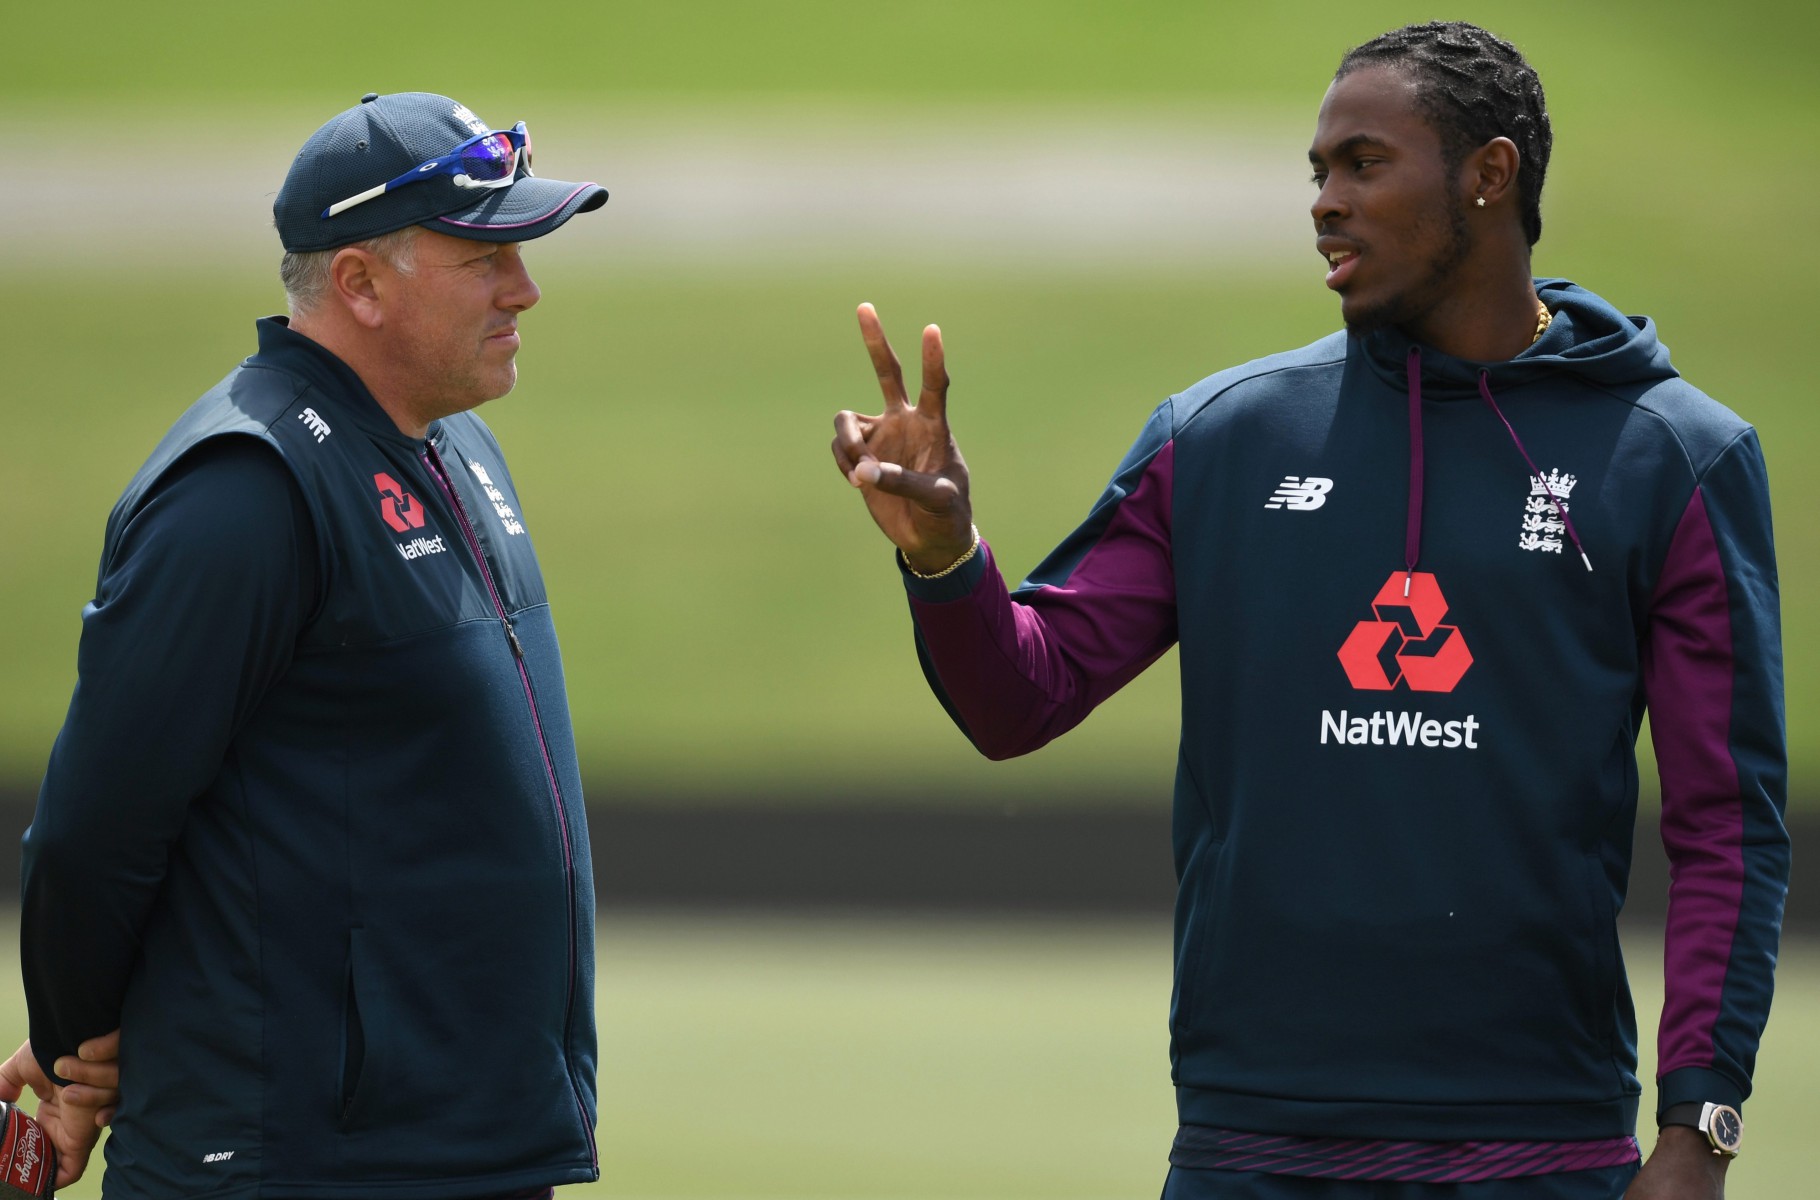 England head coach Chris Silverwood knows the tourists need Jofra Archer at his best